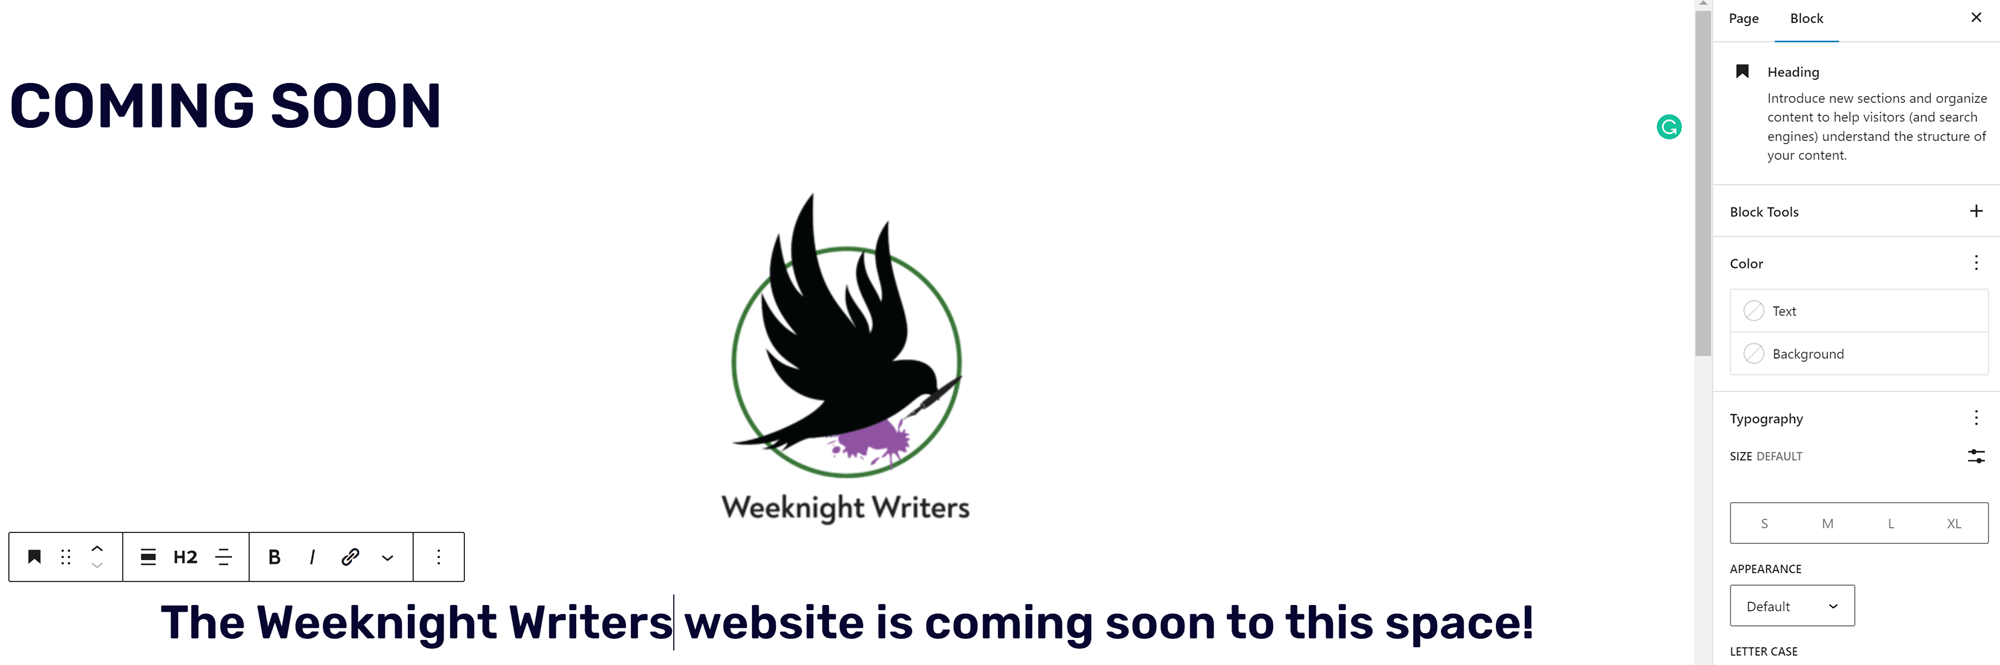 WordPress coming soon page with logo + coming soon header